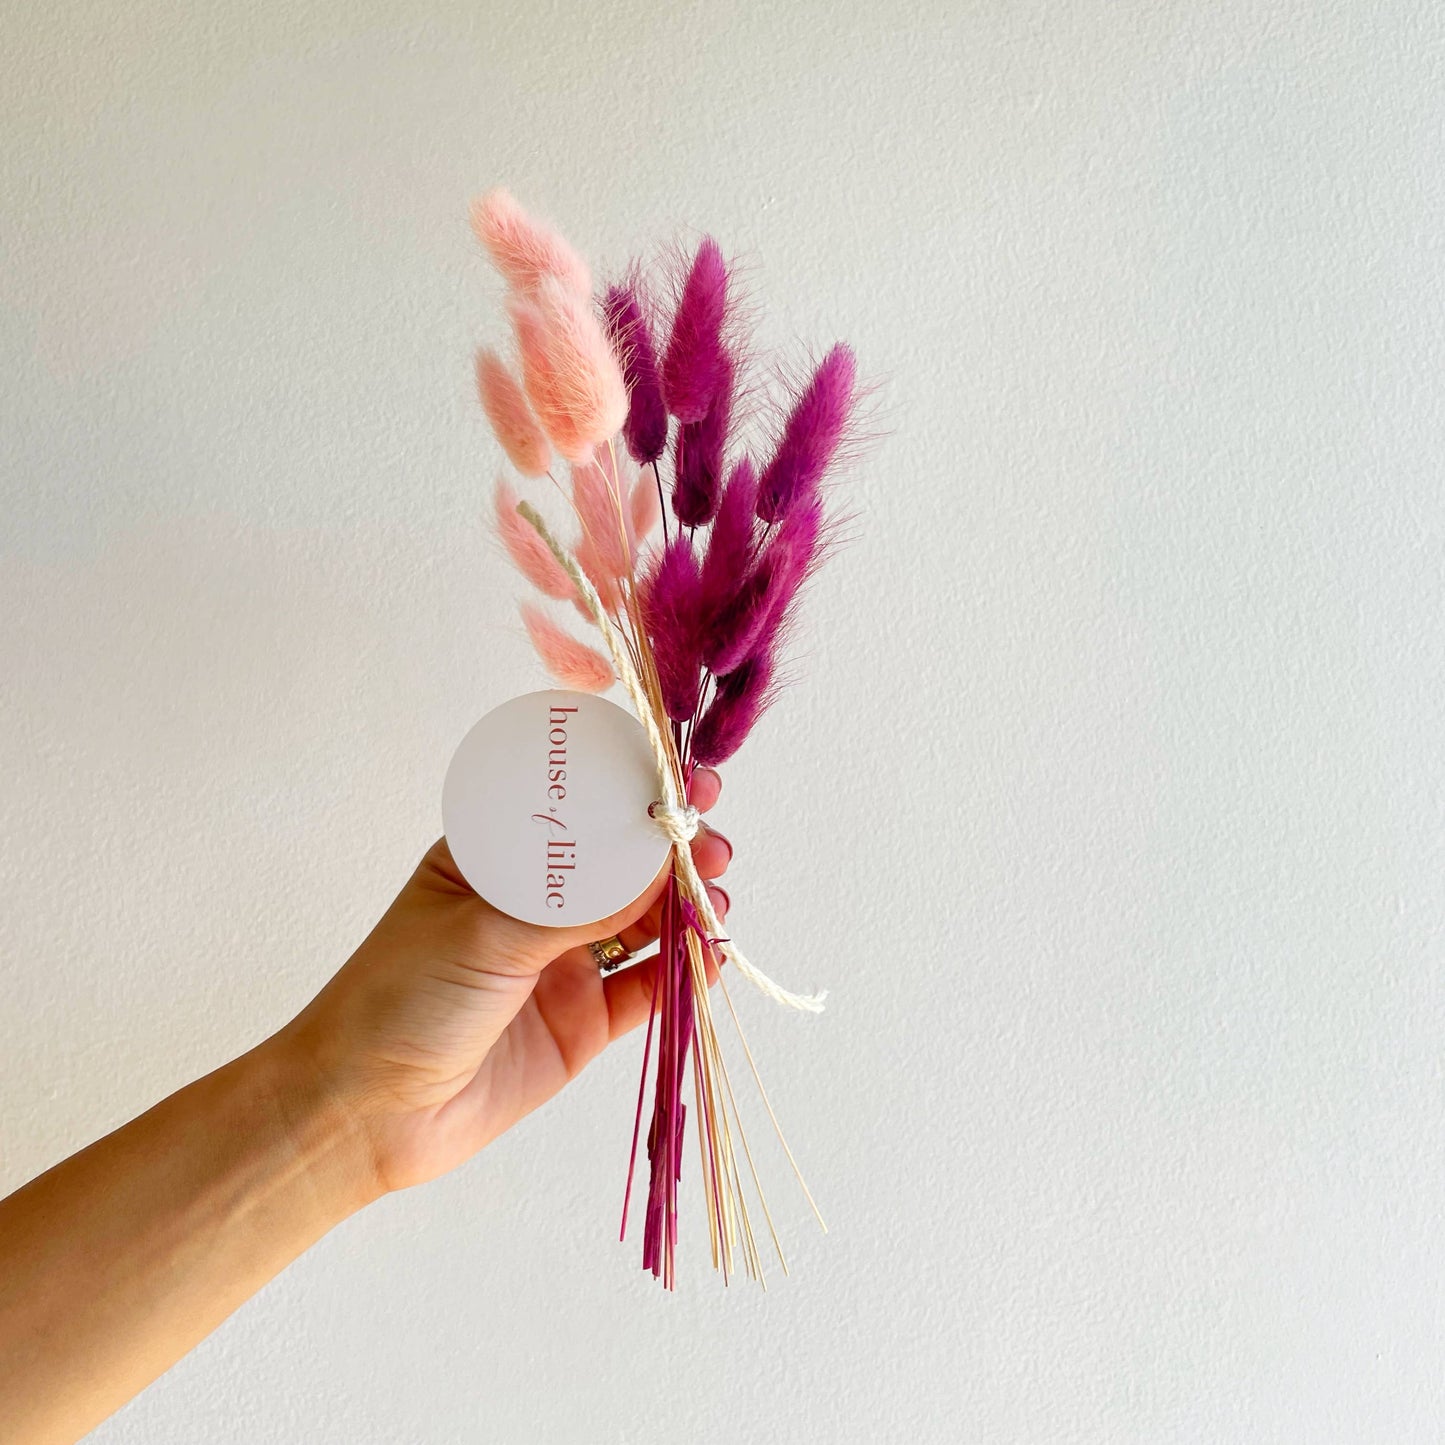 Dried Flowers: Bunny Tail Bundle Large (pink and purple).